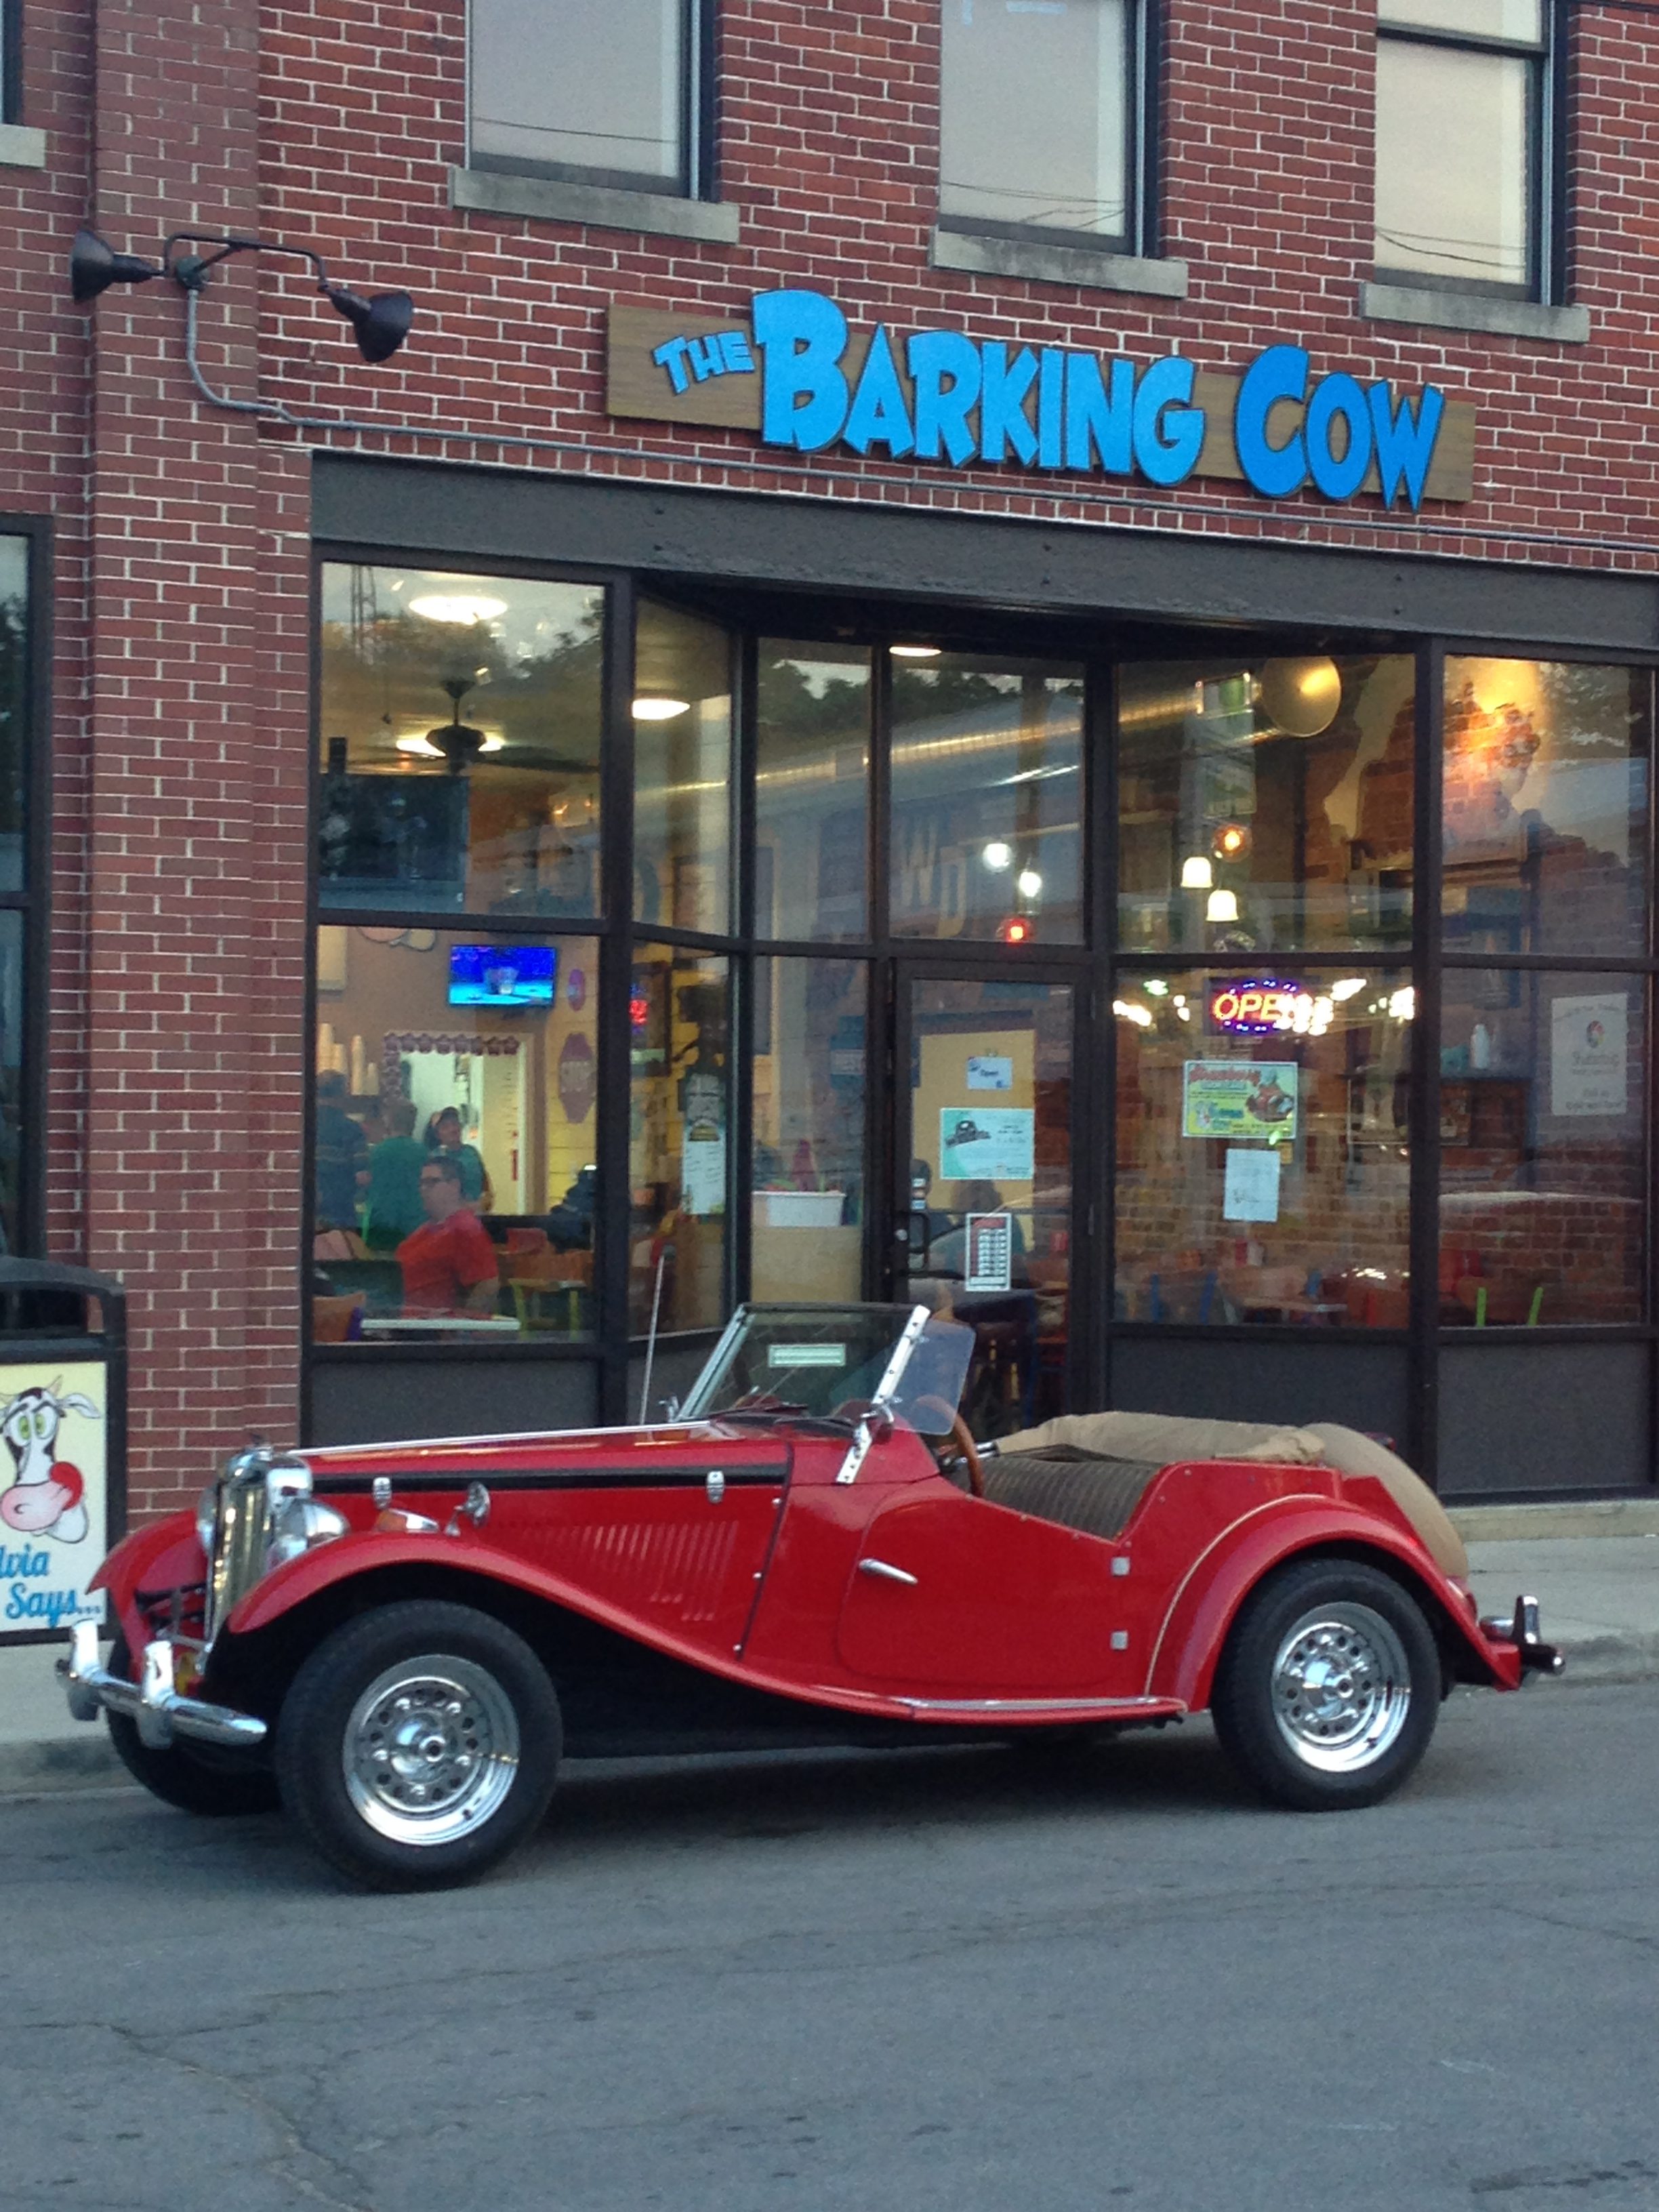 The Barking Cow Storefront